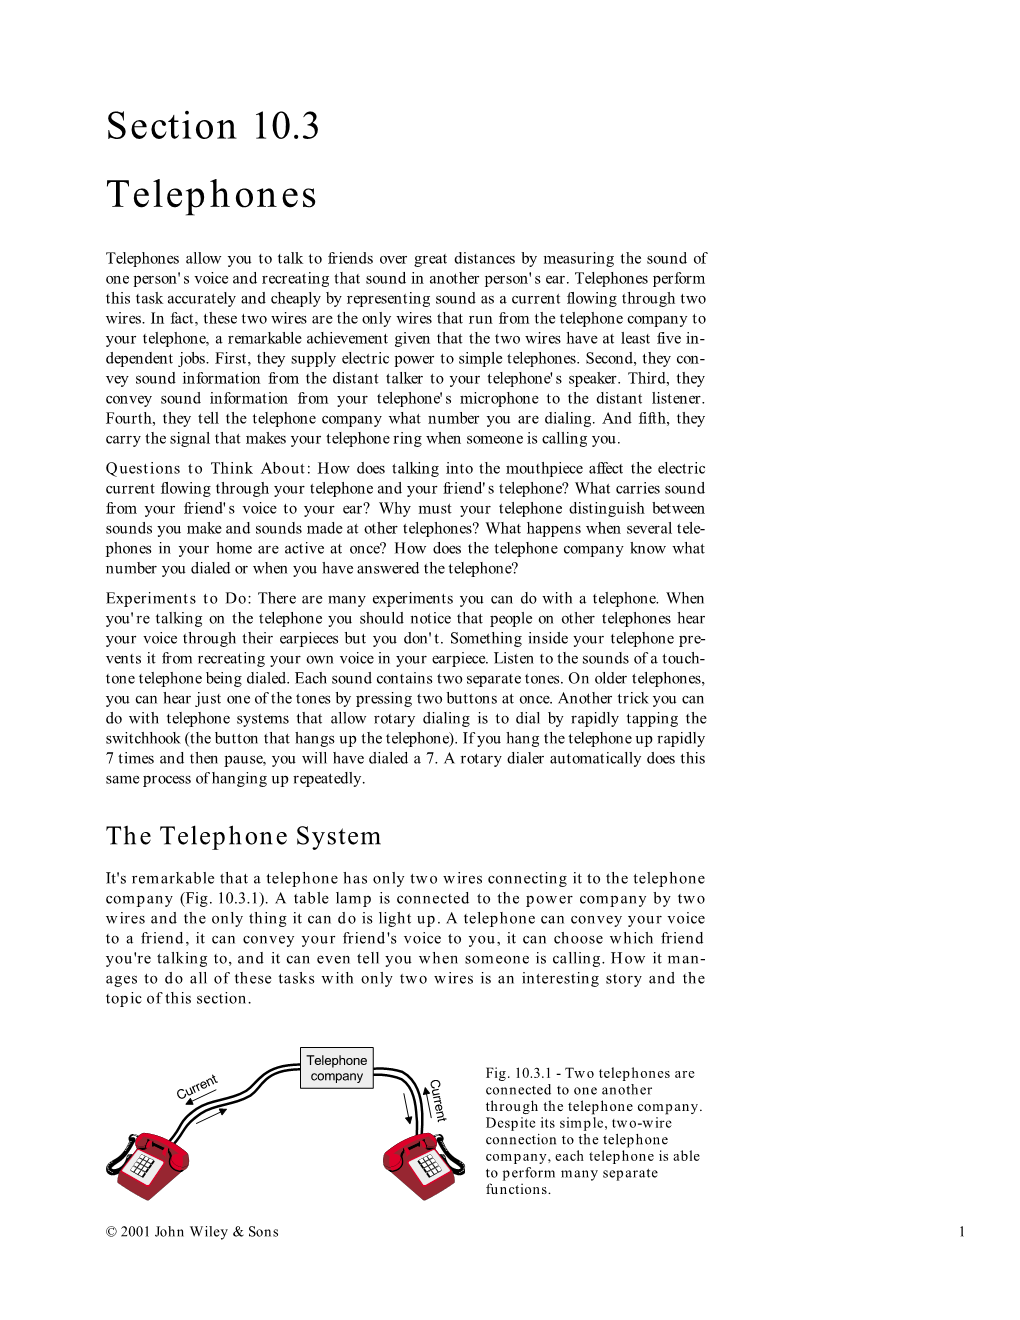 Section 10.3 Telephones